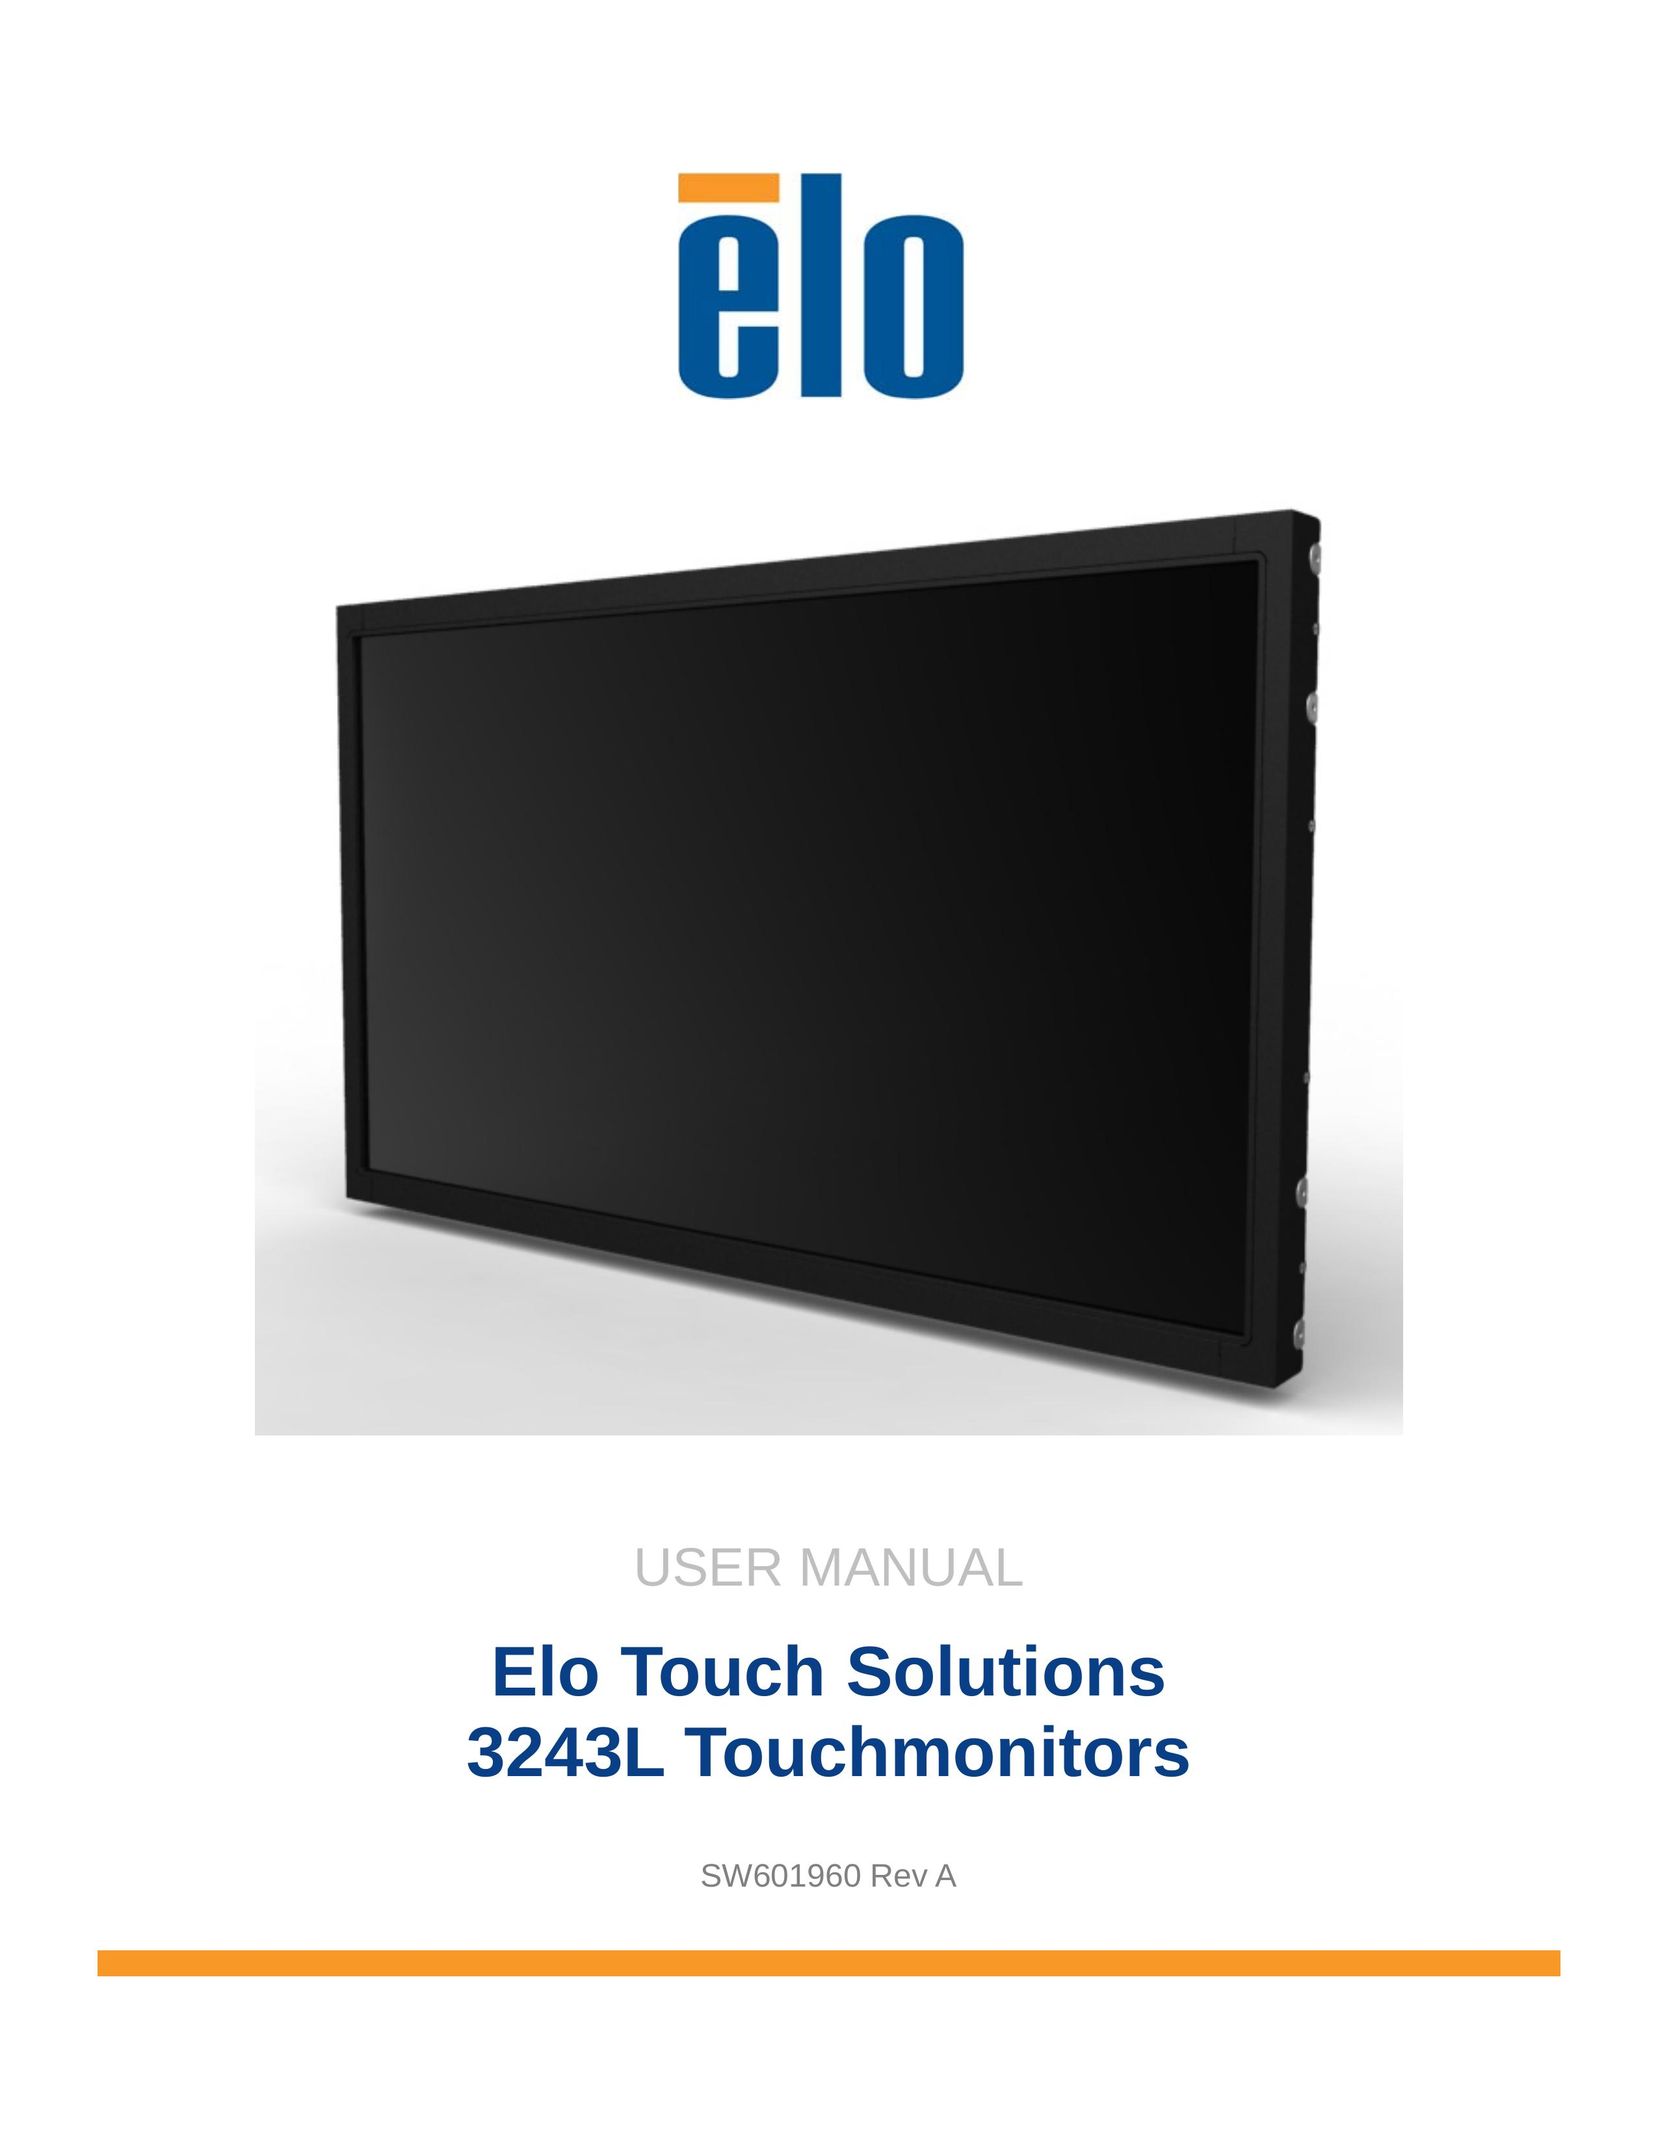 Elo TouchSystems 3243L Car Video System User Manual